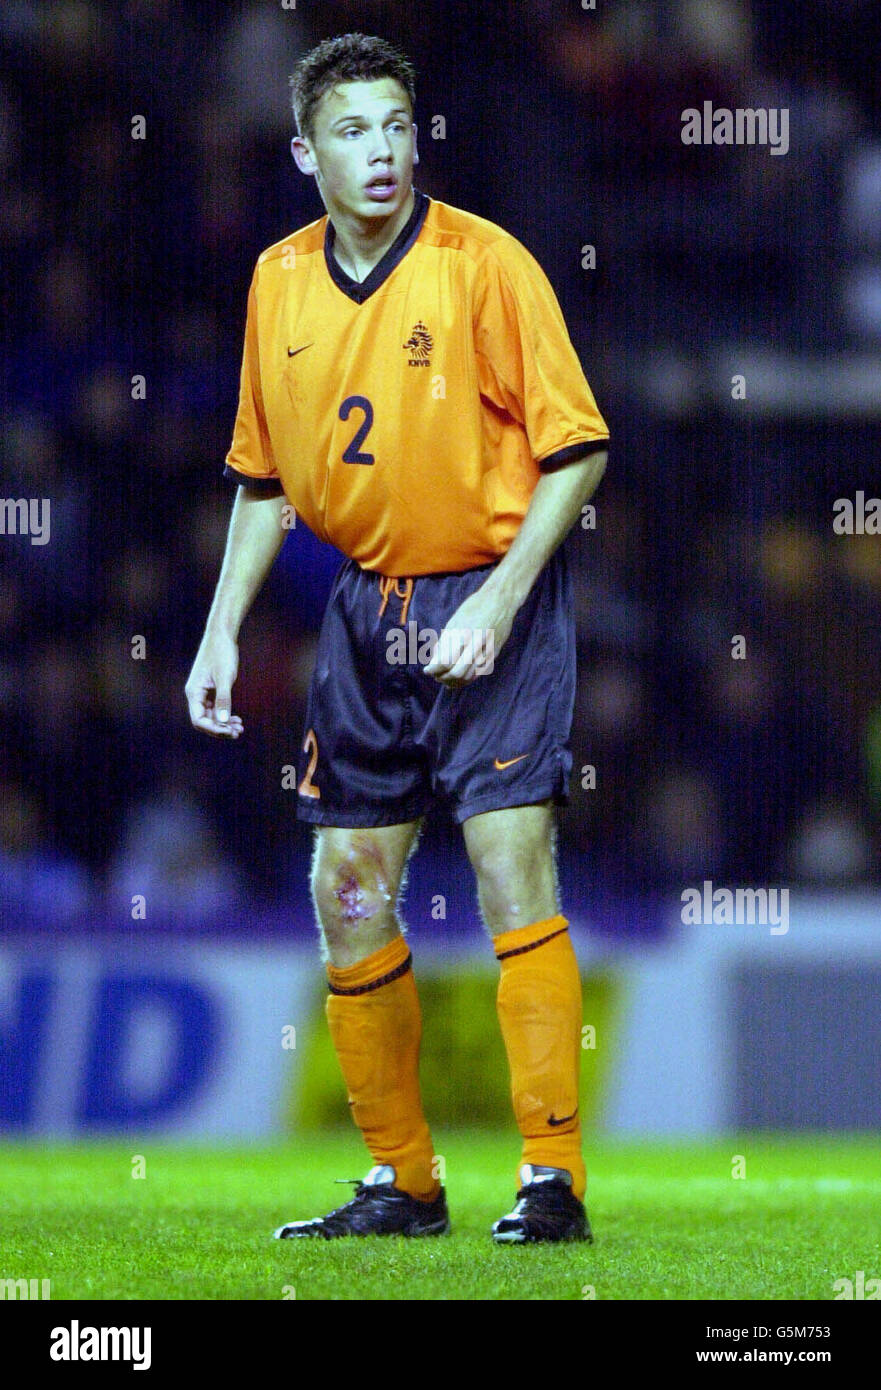 Holland's Under 21 John Heitinga during the play-off, second leg of the UEFA U21 Championship Qualifier, between England v Holland at Pride Park, Derby.. Photo Rui Vieira. Stock Photo